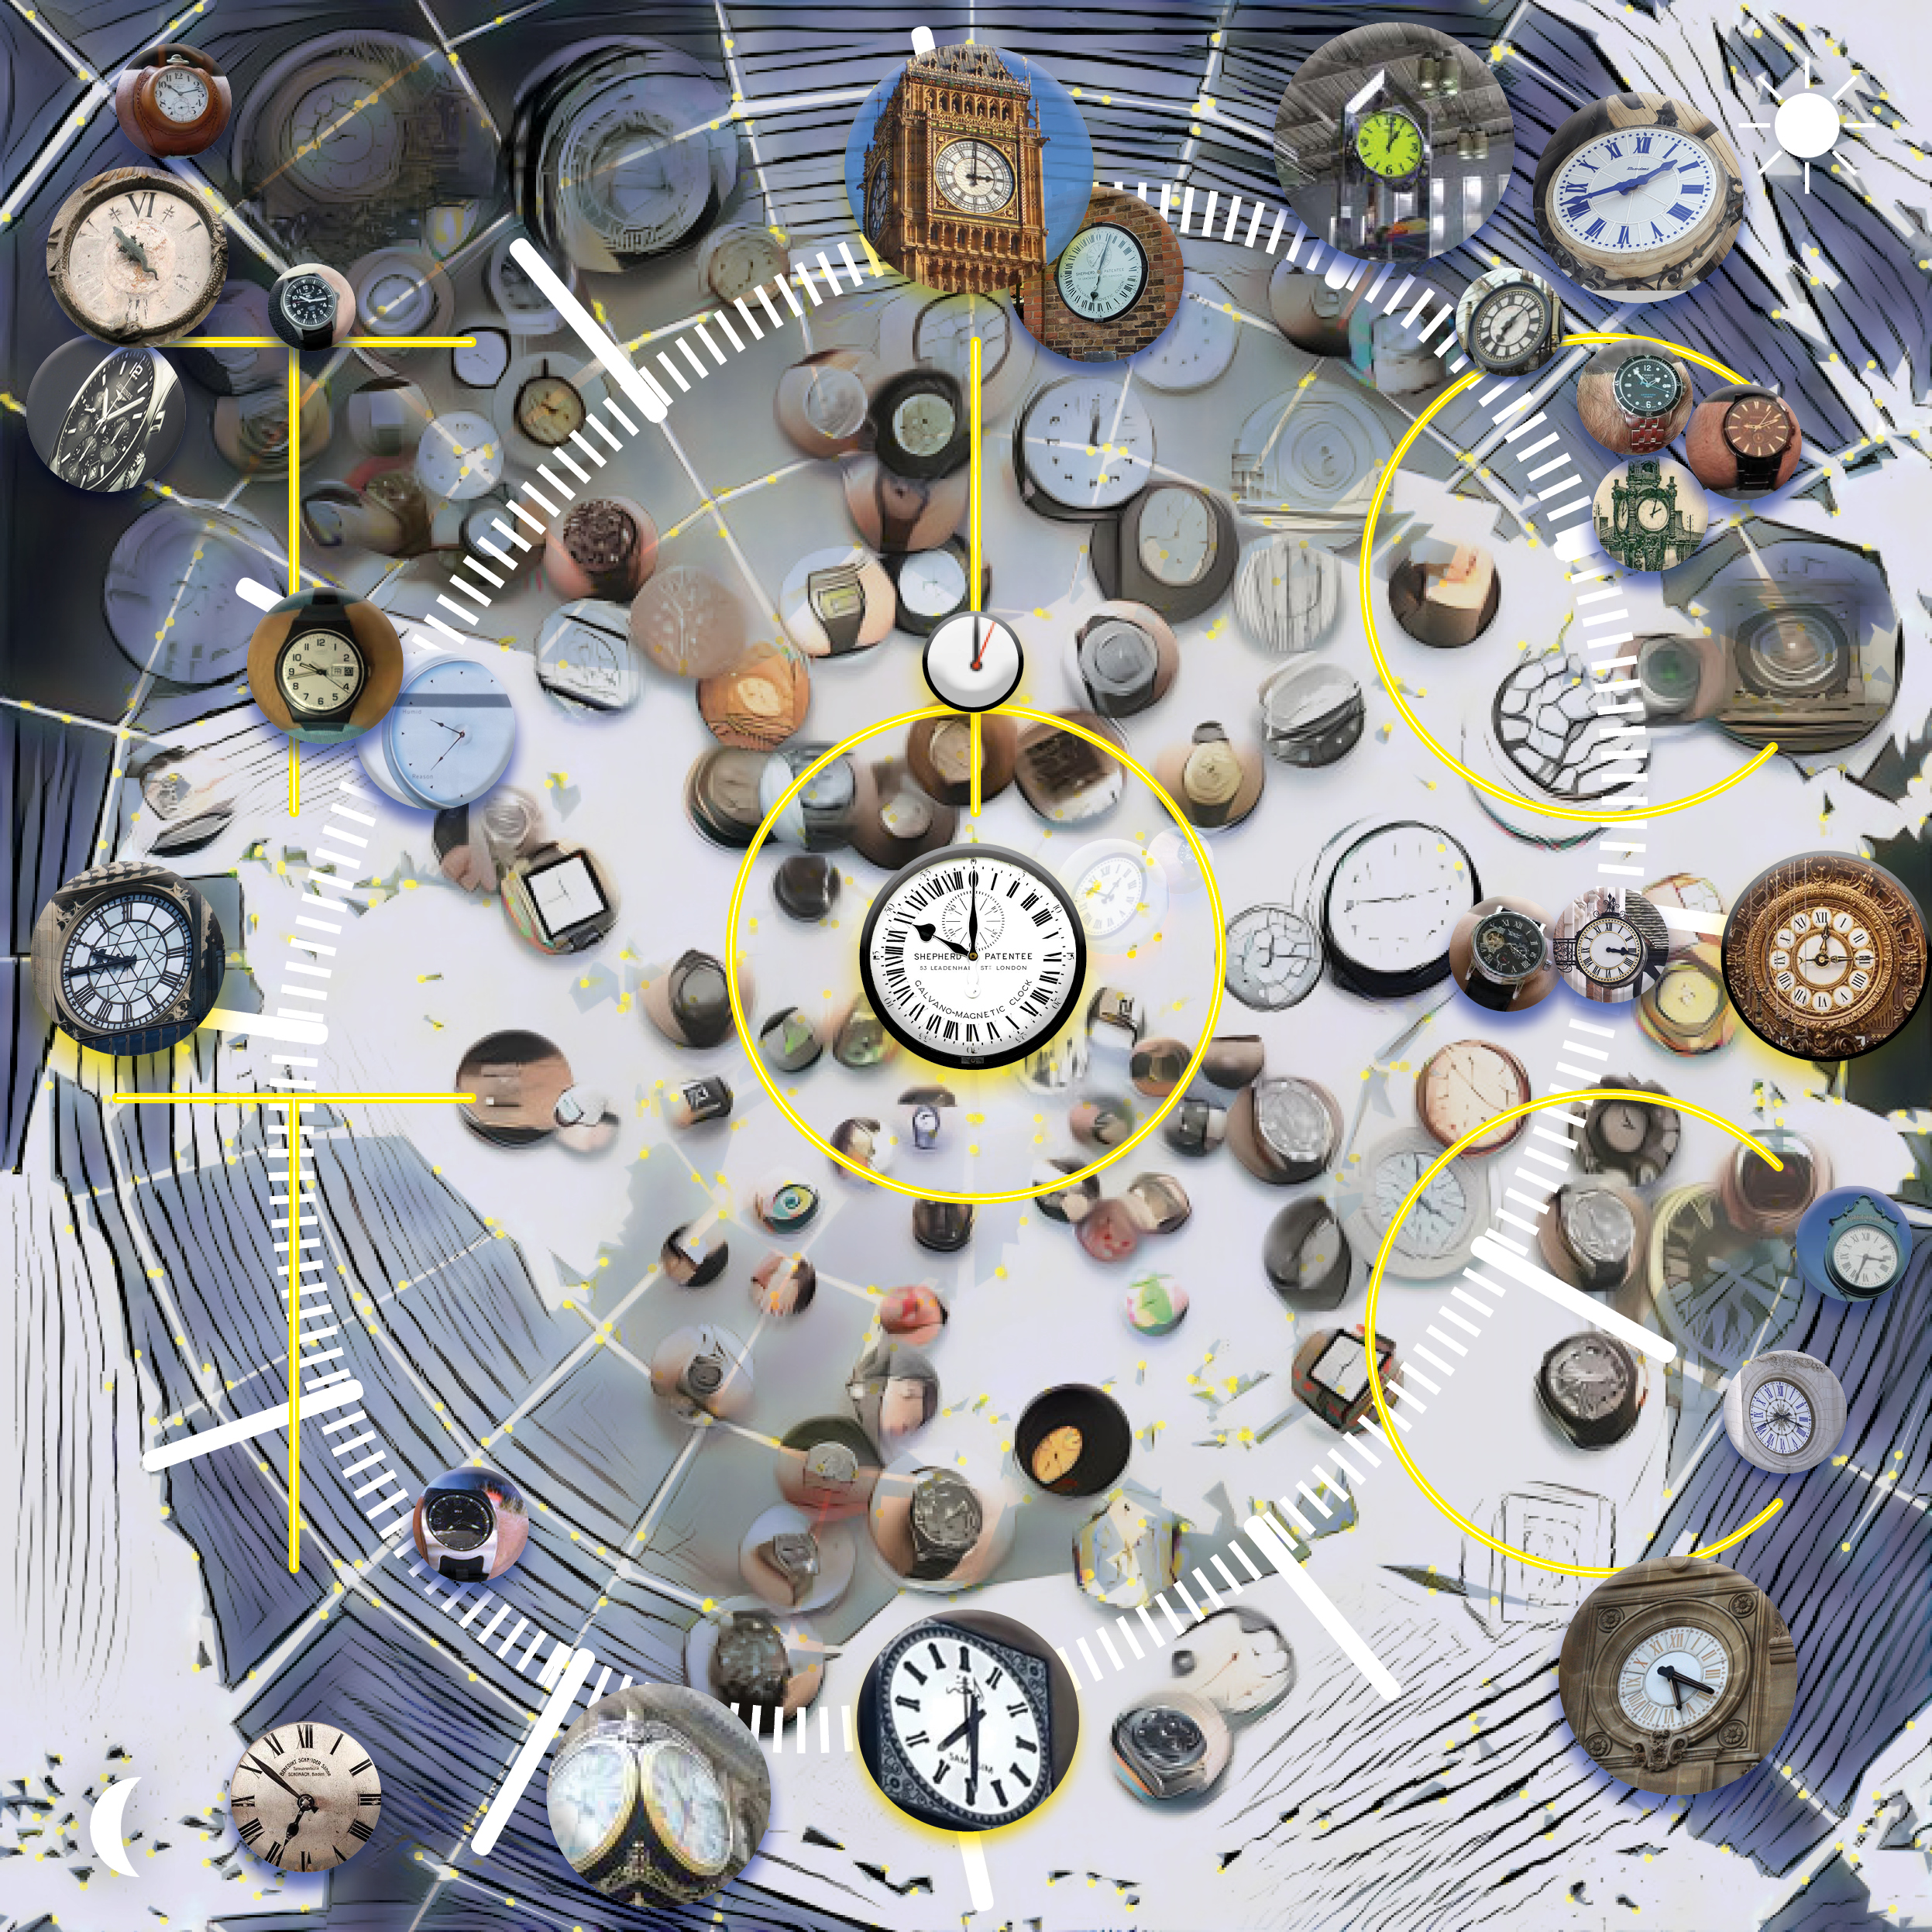 A simage of clocks by Erik Adigard, M-A-D